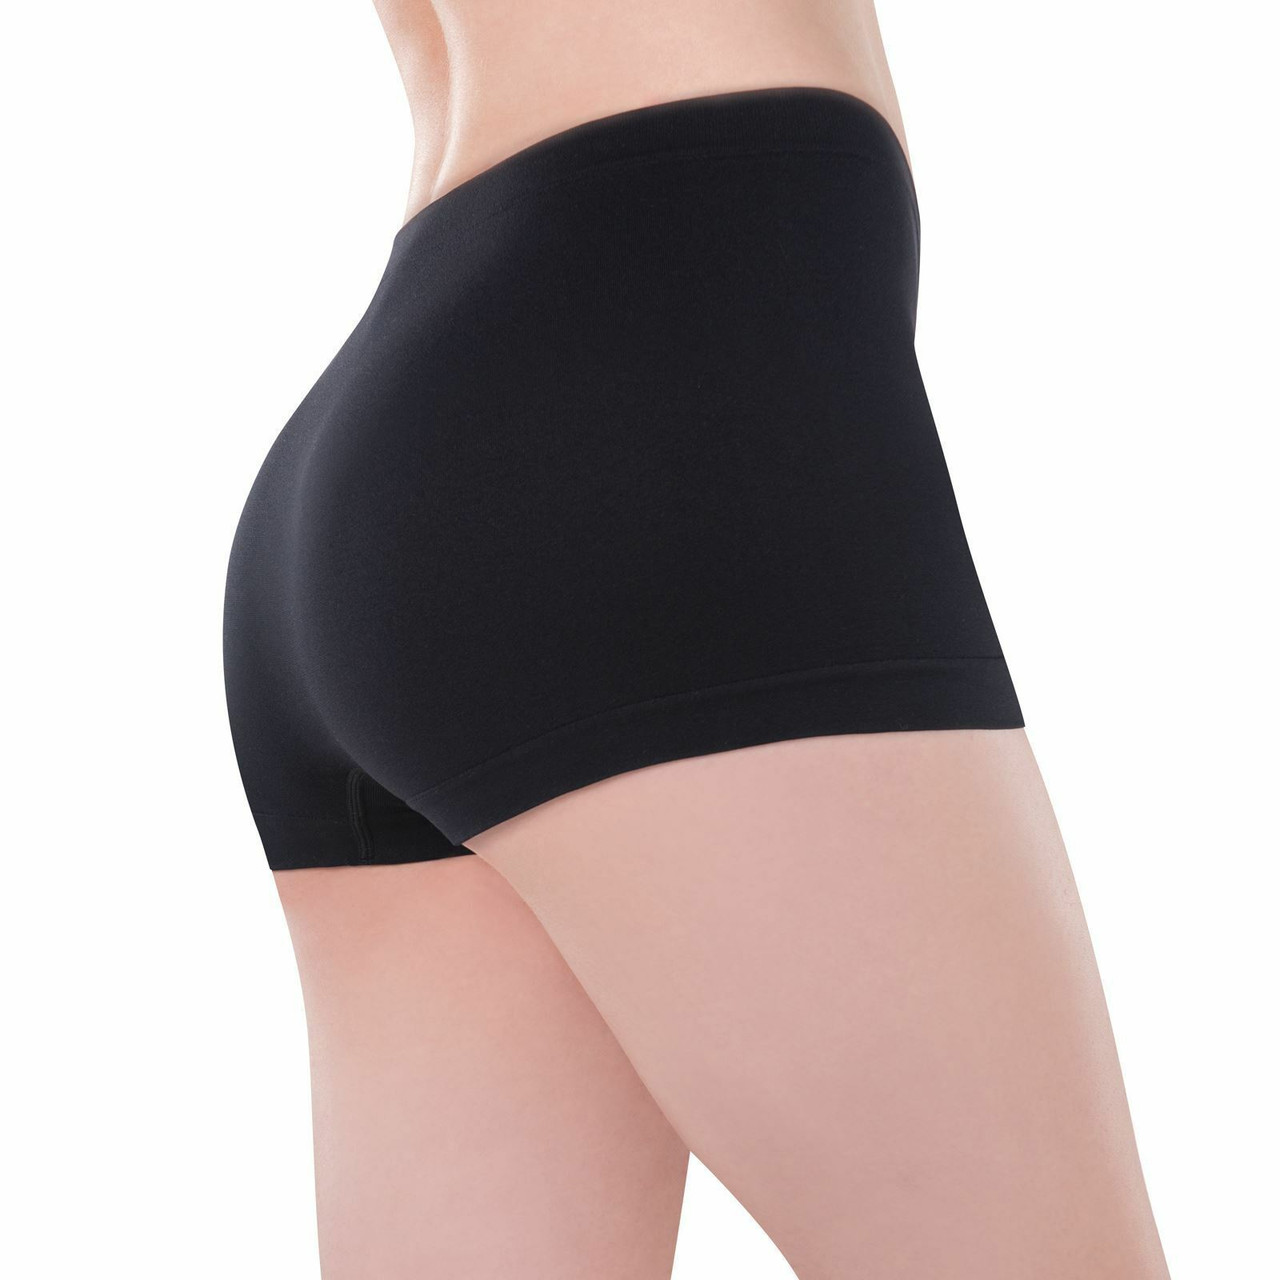 Ladies Boy Booty Shorts Hot Pants Boxers Stretch Soft Under Fancy